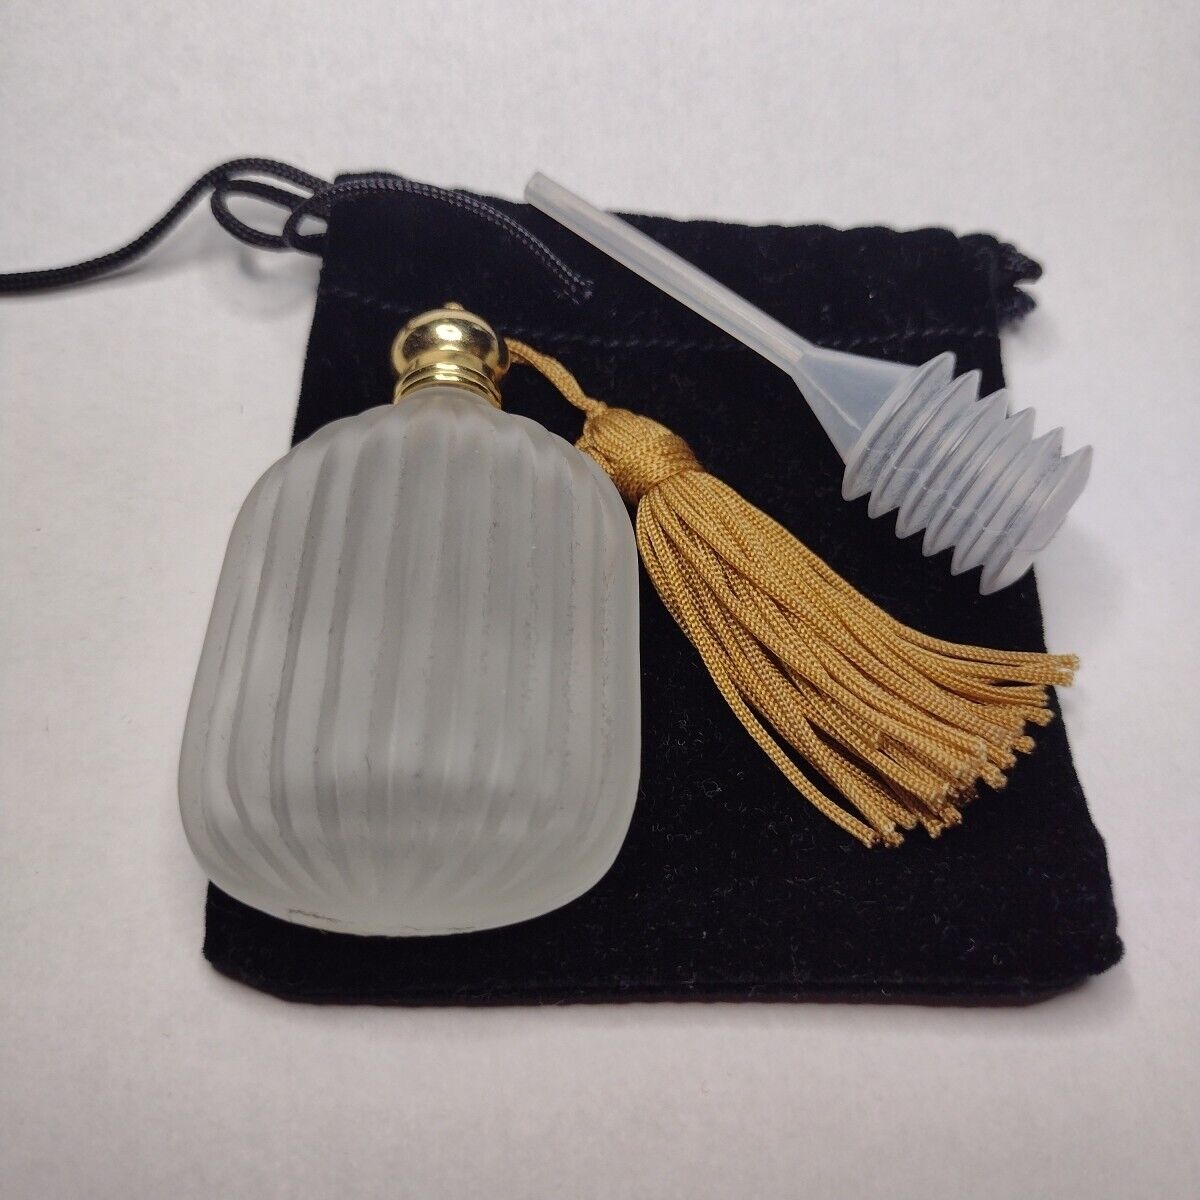 VINTAGE FROSTED GLASS PURSE SIZE PERFUME BOTTLE WITH LID, POUCH & TASSEL